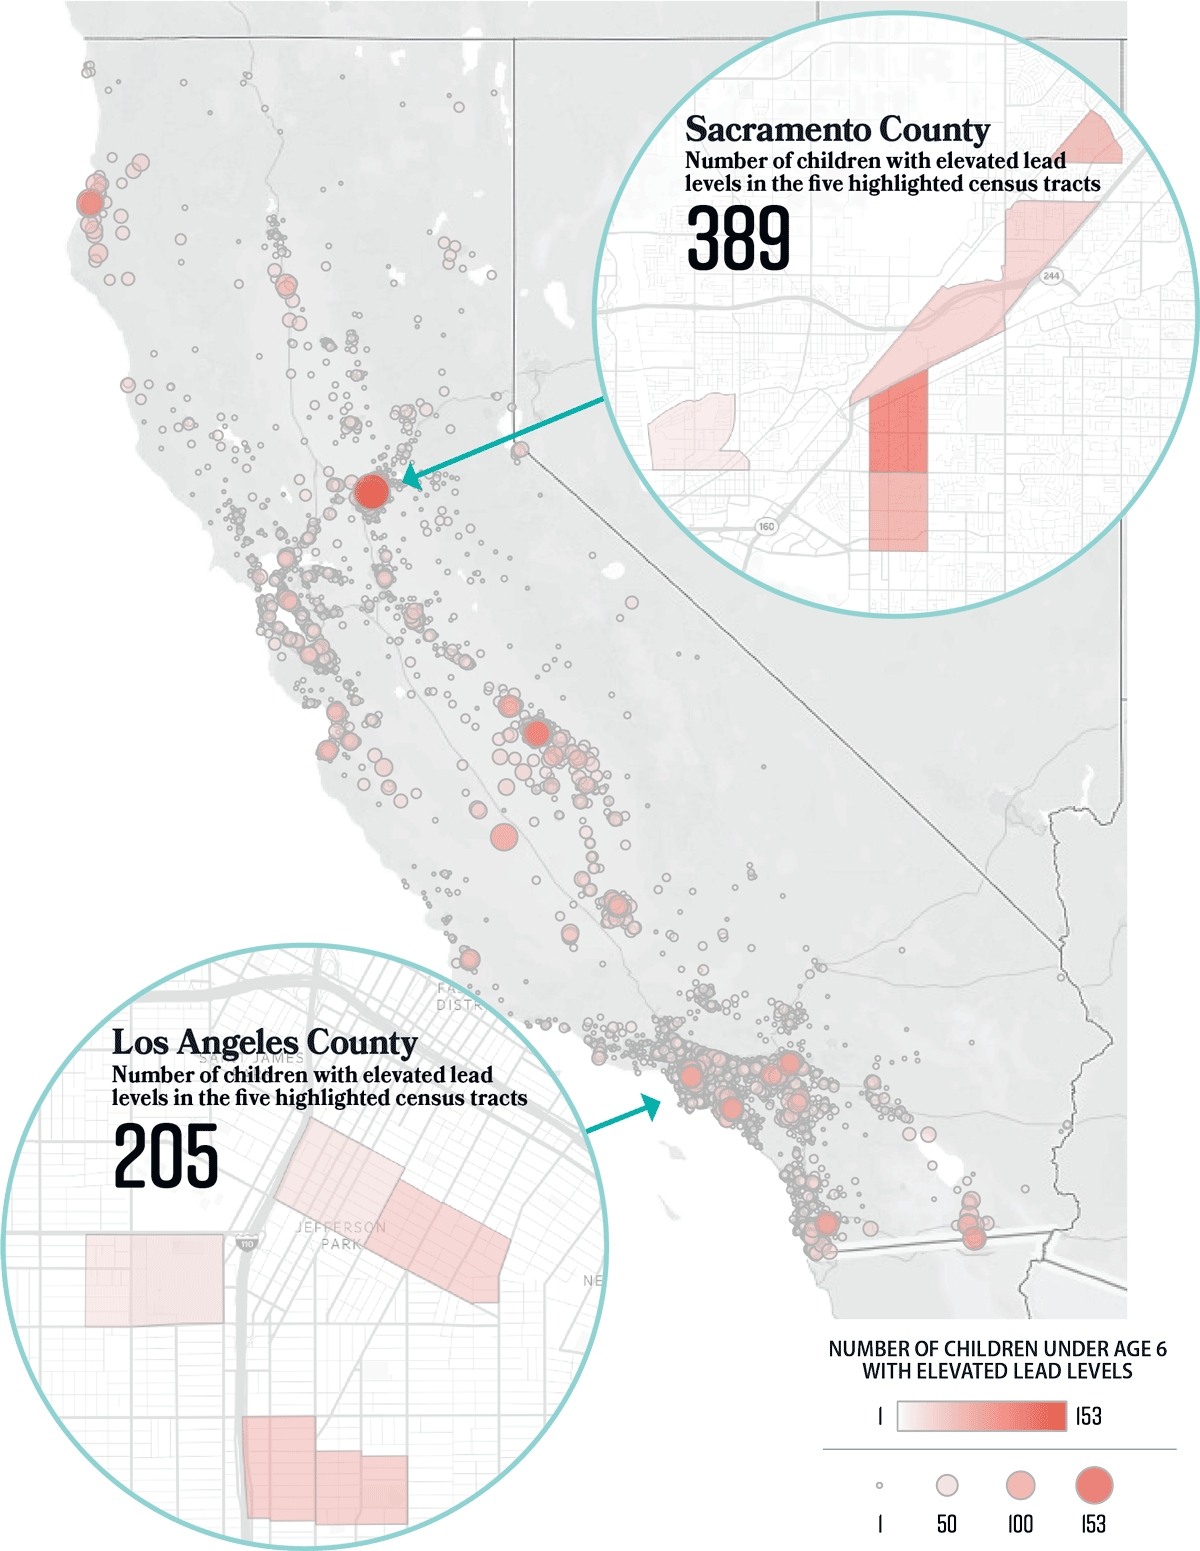 A map of California showing that children with elevated lead levels are concentrated in mostly the urban parts of the State, with pullouts for Sacramento and Los Angeles Counties.